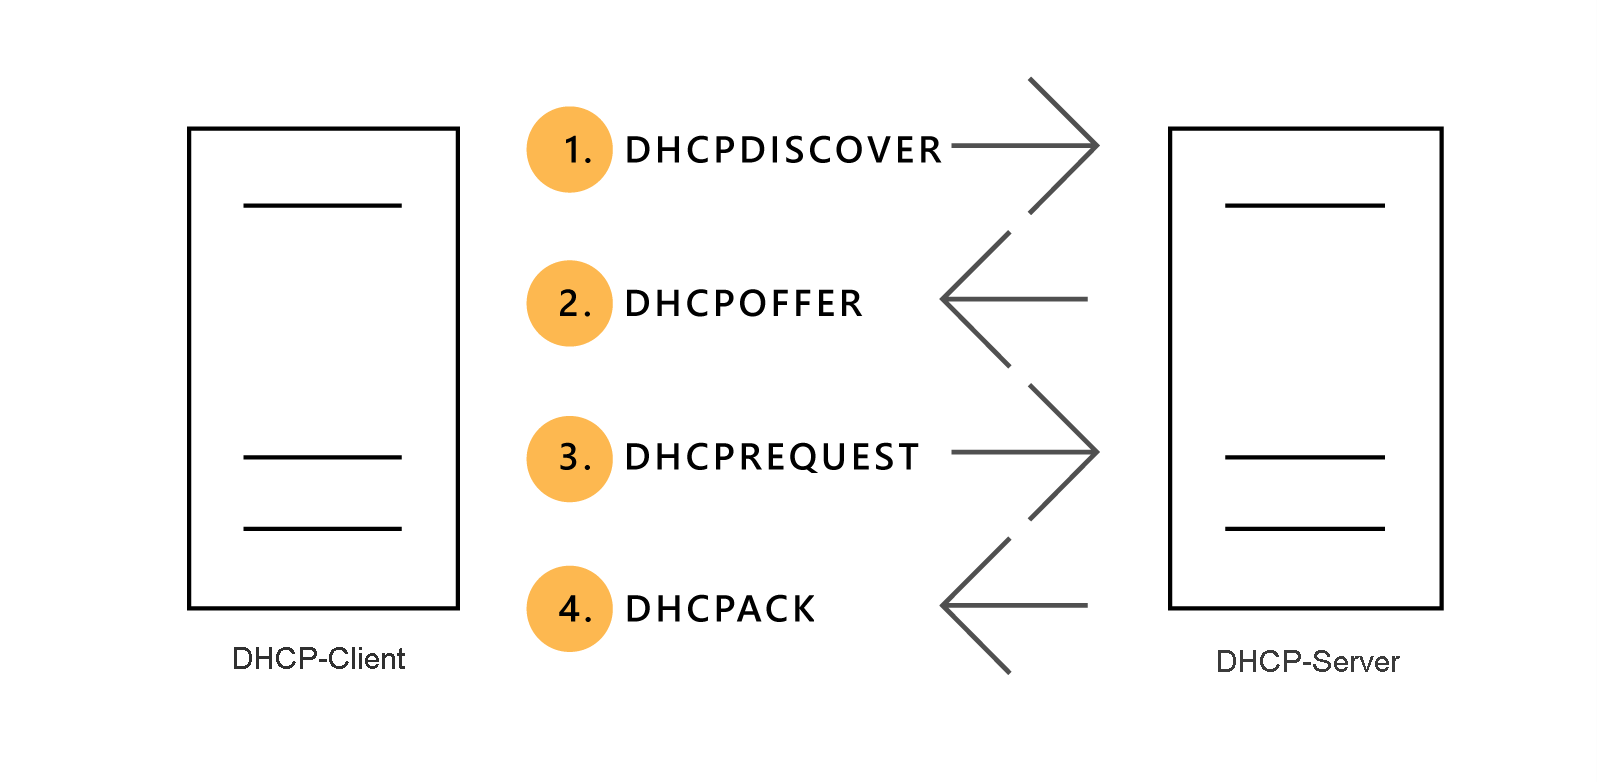 Diagram depicting the communication process between a DHCP server and DHCP client. It consists of DHCPDISCOVER, DHCPOFFER, DHCPREQUEST, and a DHCPACK.